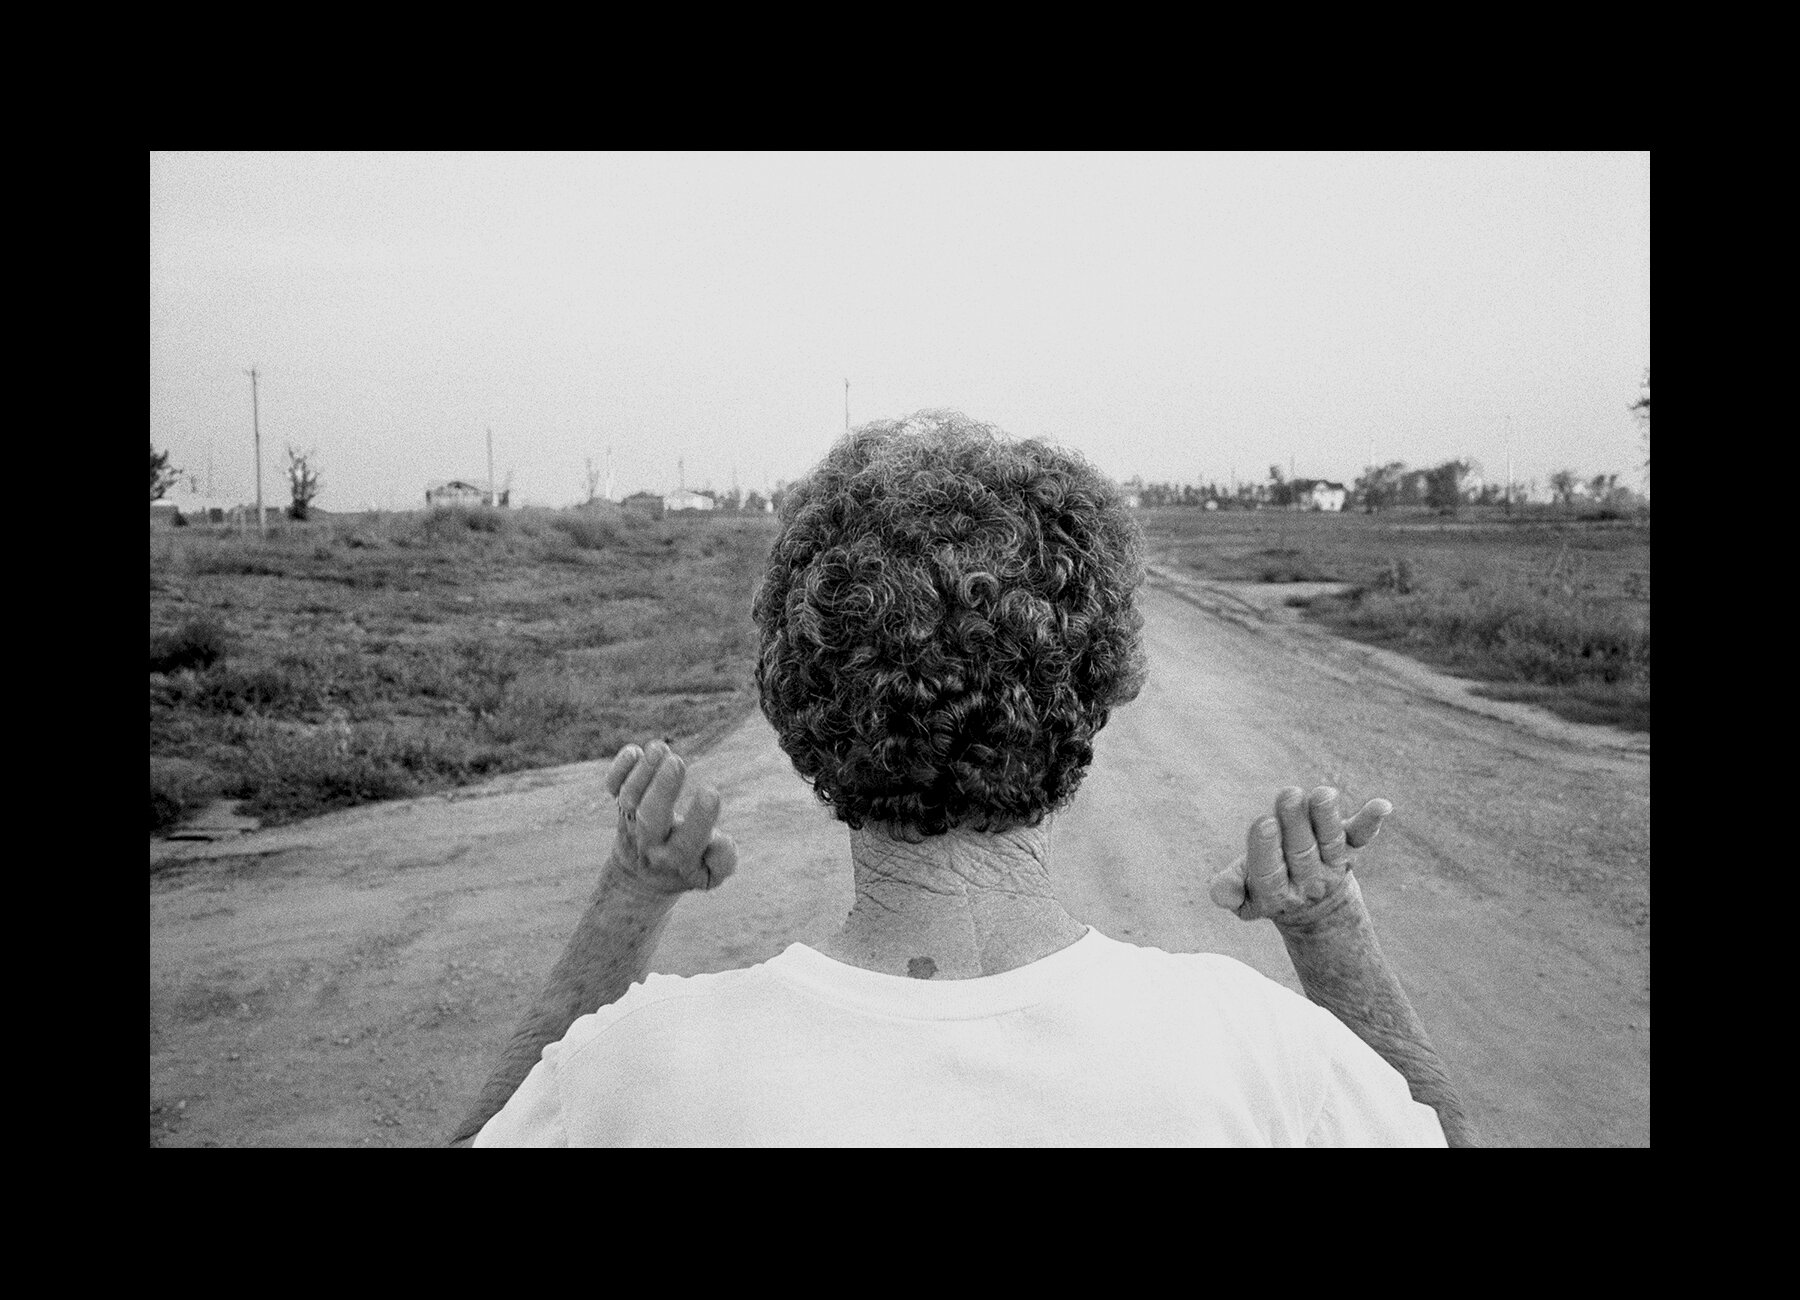  Delphia Stuby, 72, stares down her street after a tornado leveled everything in sight in Spencer, South Dakota. 1998 